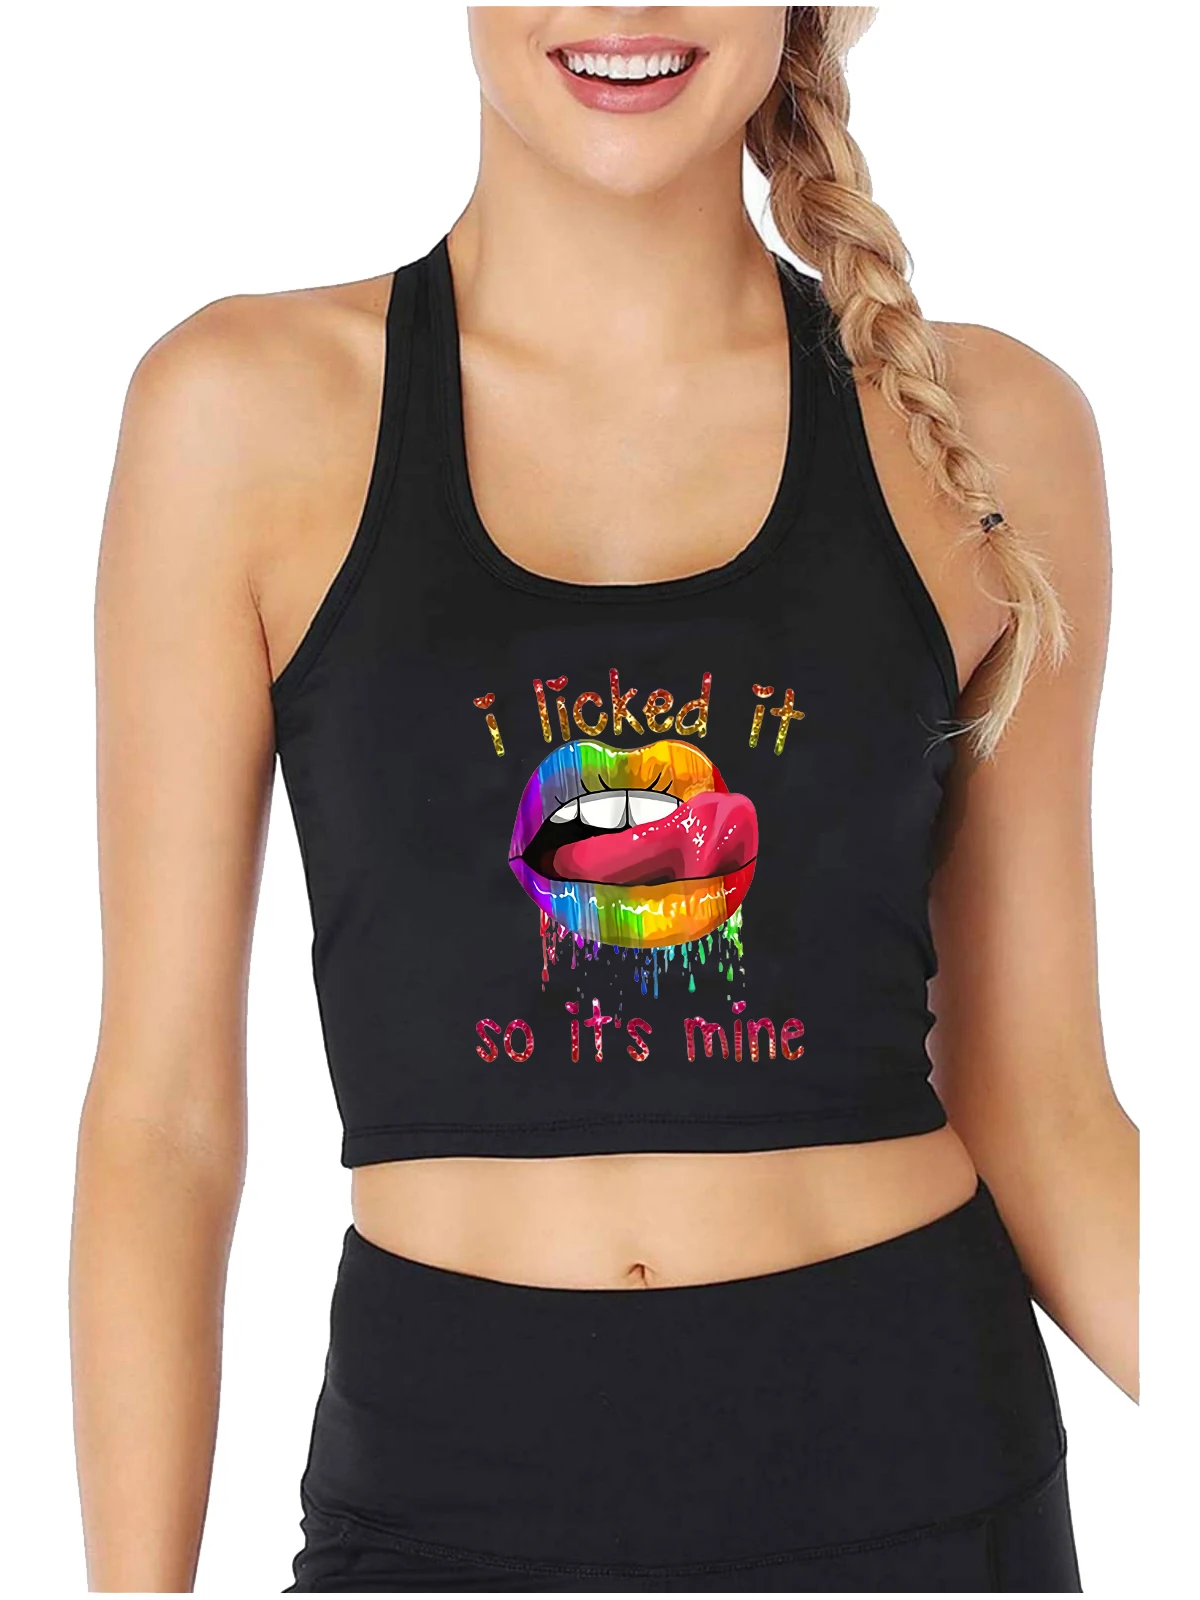 

Rainbow Lips Graphic I Licked It So It's Mine Design Crop Top Adult Humor Fun Flirty Tank Tops Hotwife Naughty Sexy Camisole